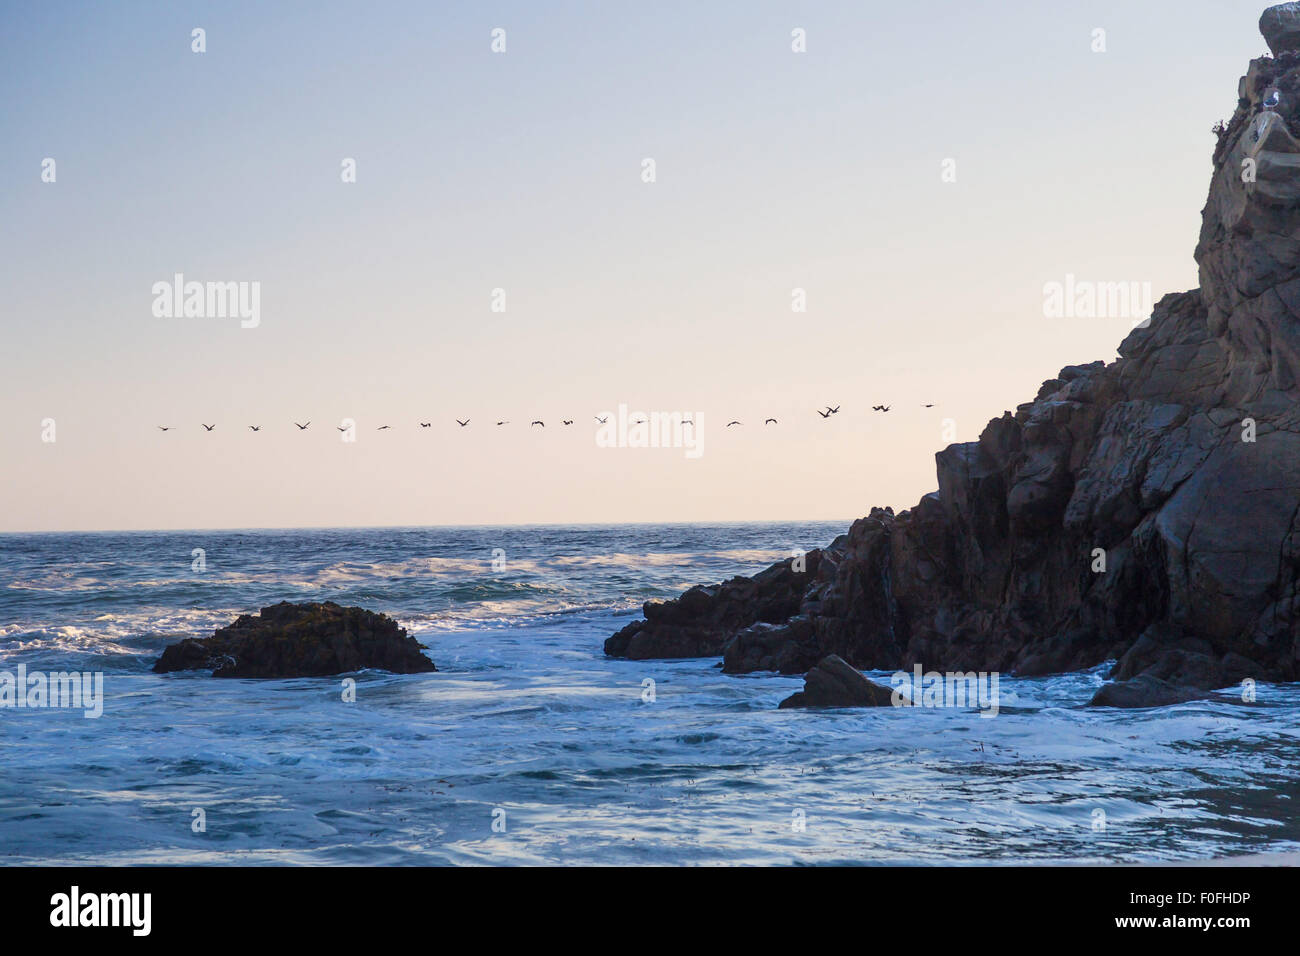 Birds flying over Pfeiffer State Beach at sunset, Big Sur, California Stock Photo